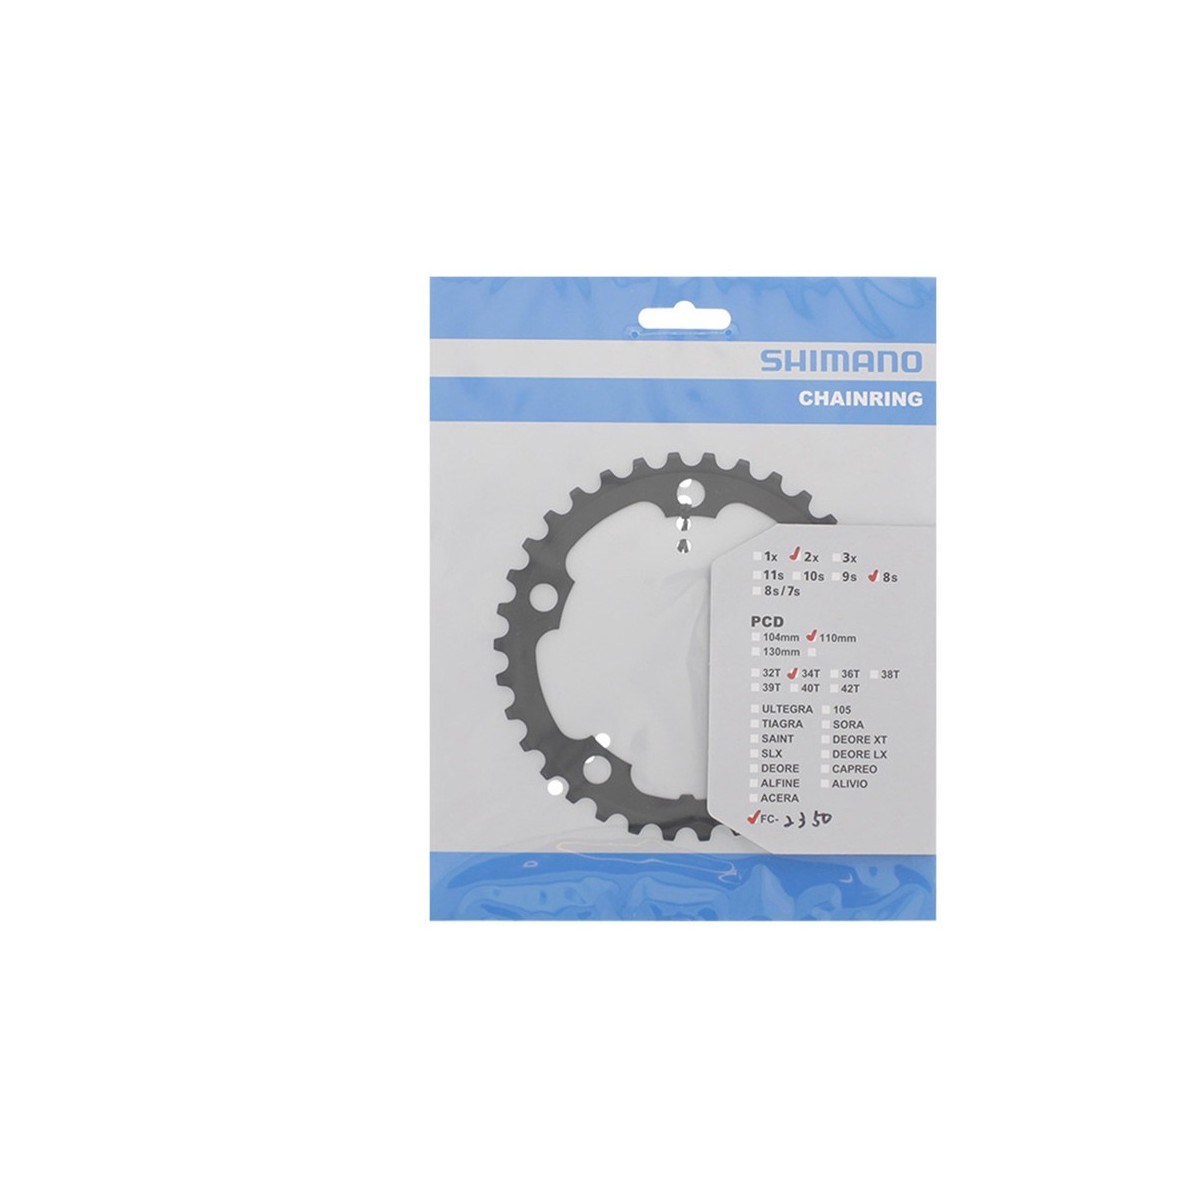 Shimano Claris FC-2350 34T front chainring